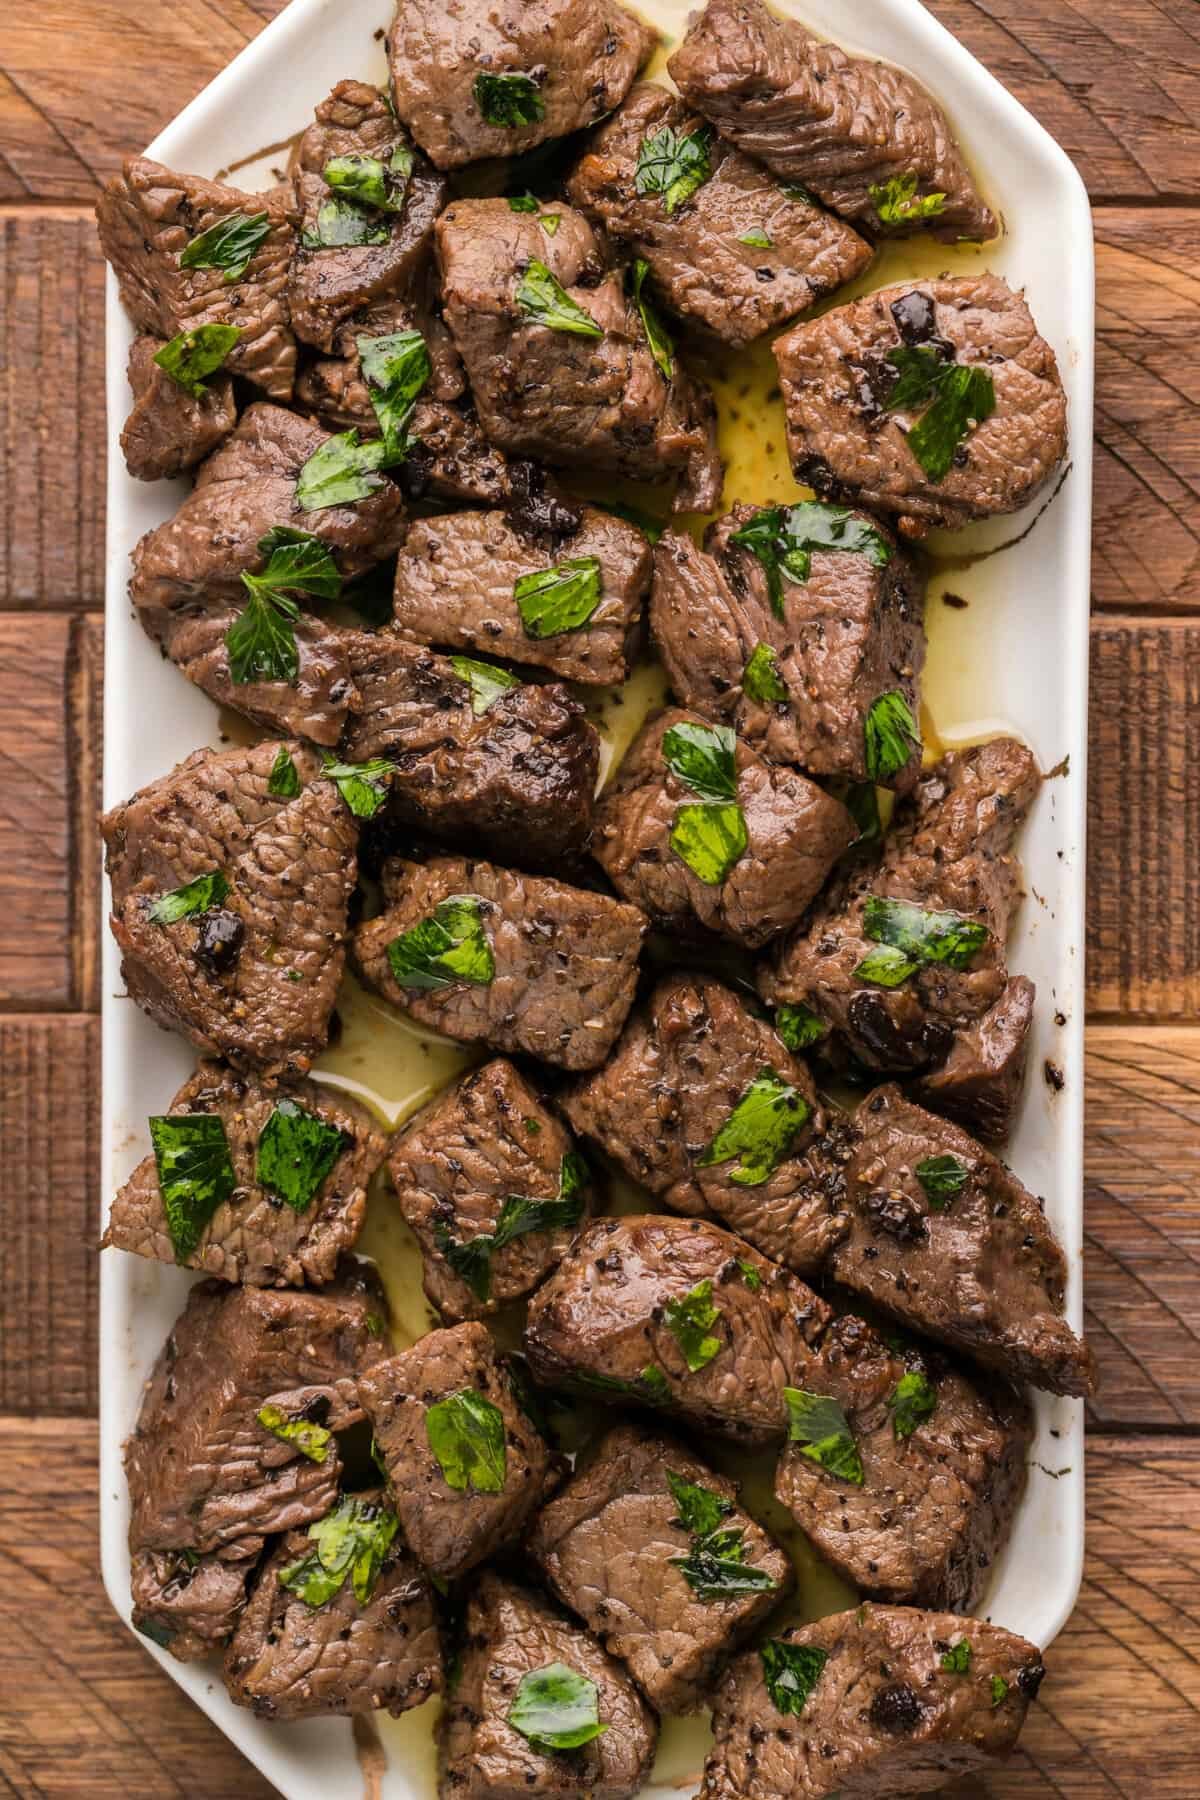 Air Fryer Garlic Butter Steak Bites — Craving the juicy, flavorful taste of steak? If so, you will be delighted to hear that you don't have to heat up your oven or fire up the grill to enjoy restaurant-style steak bites!